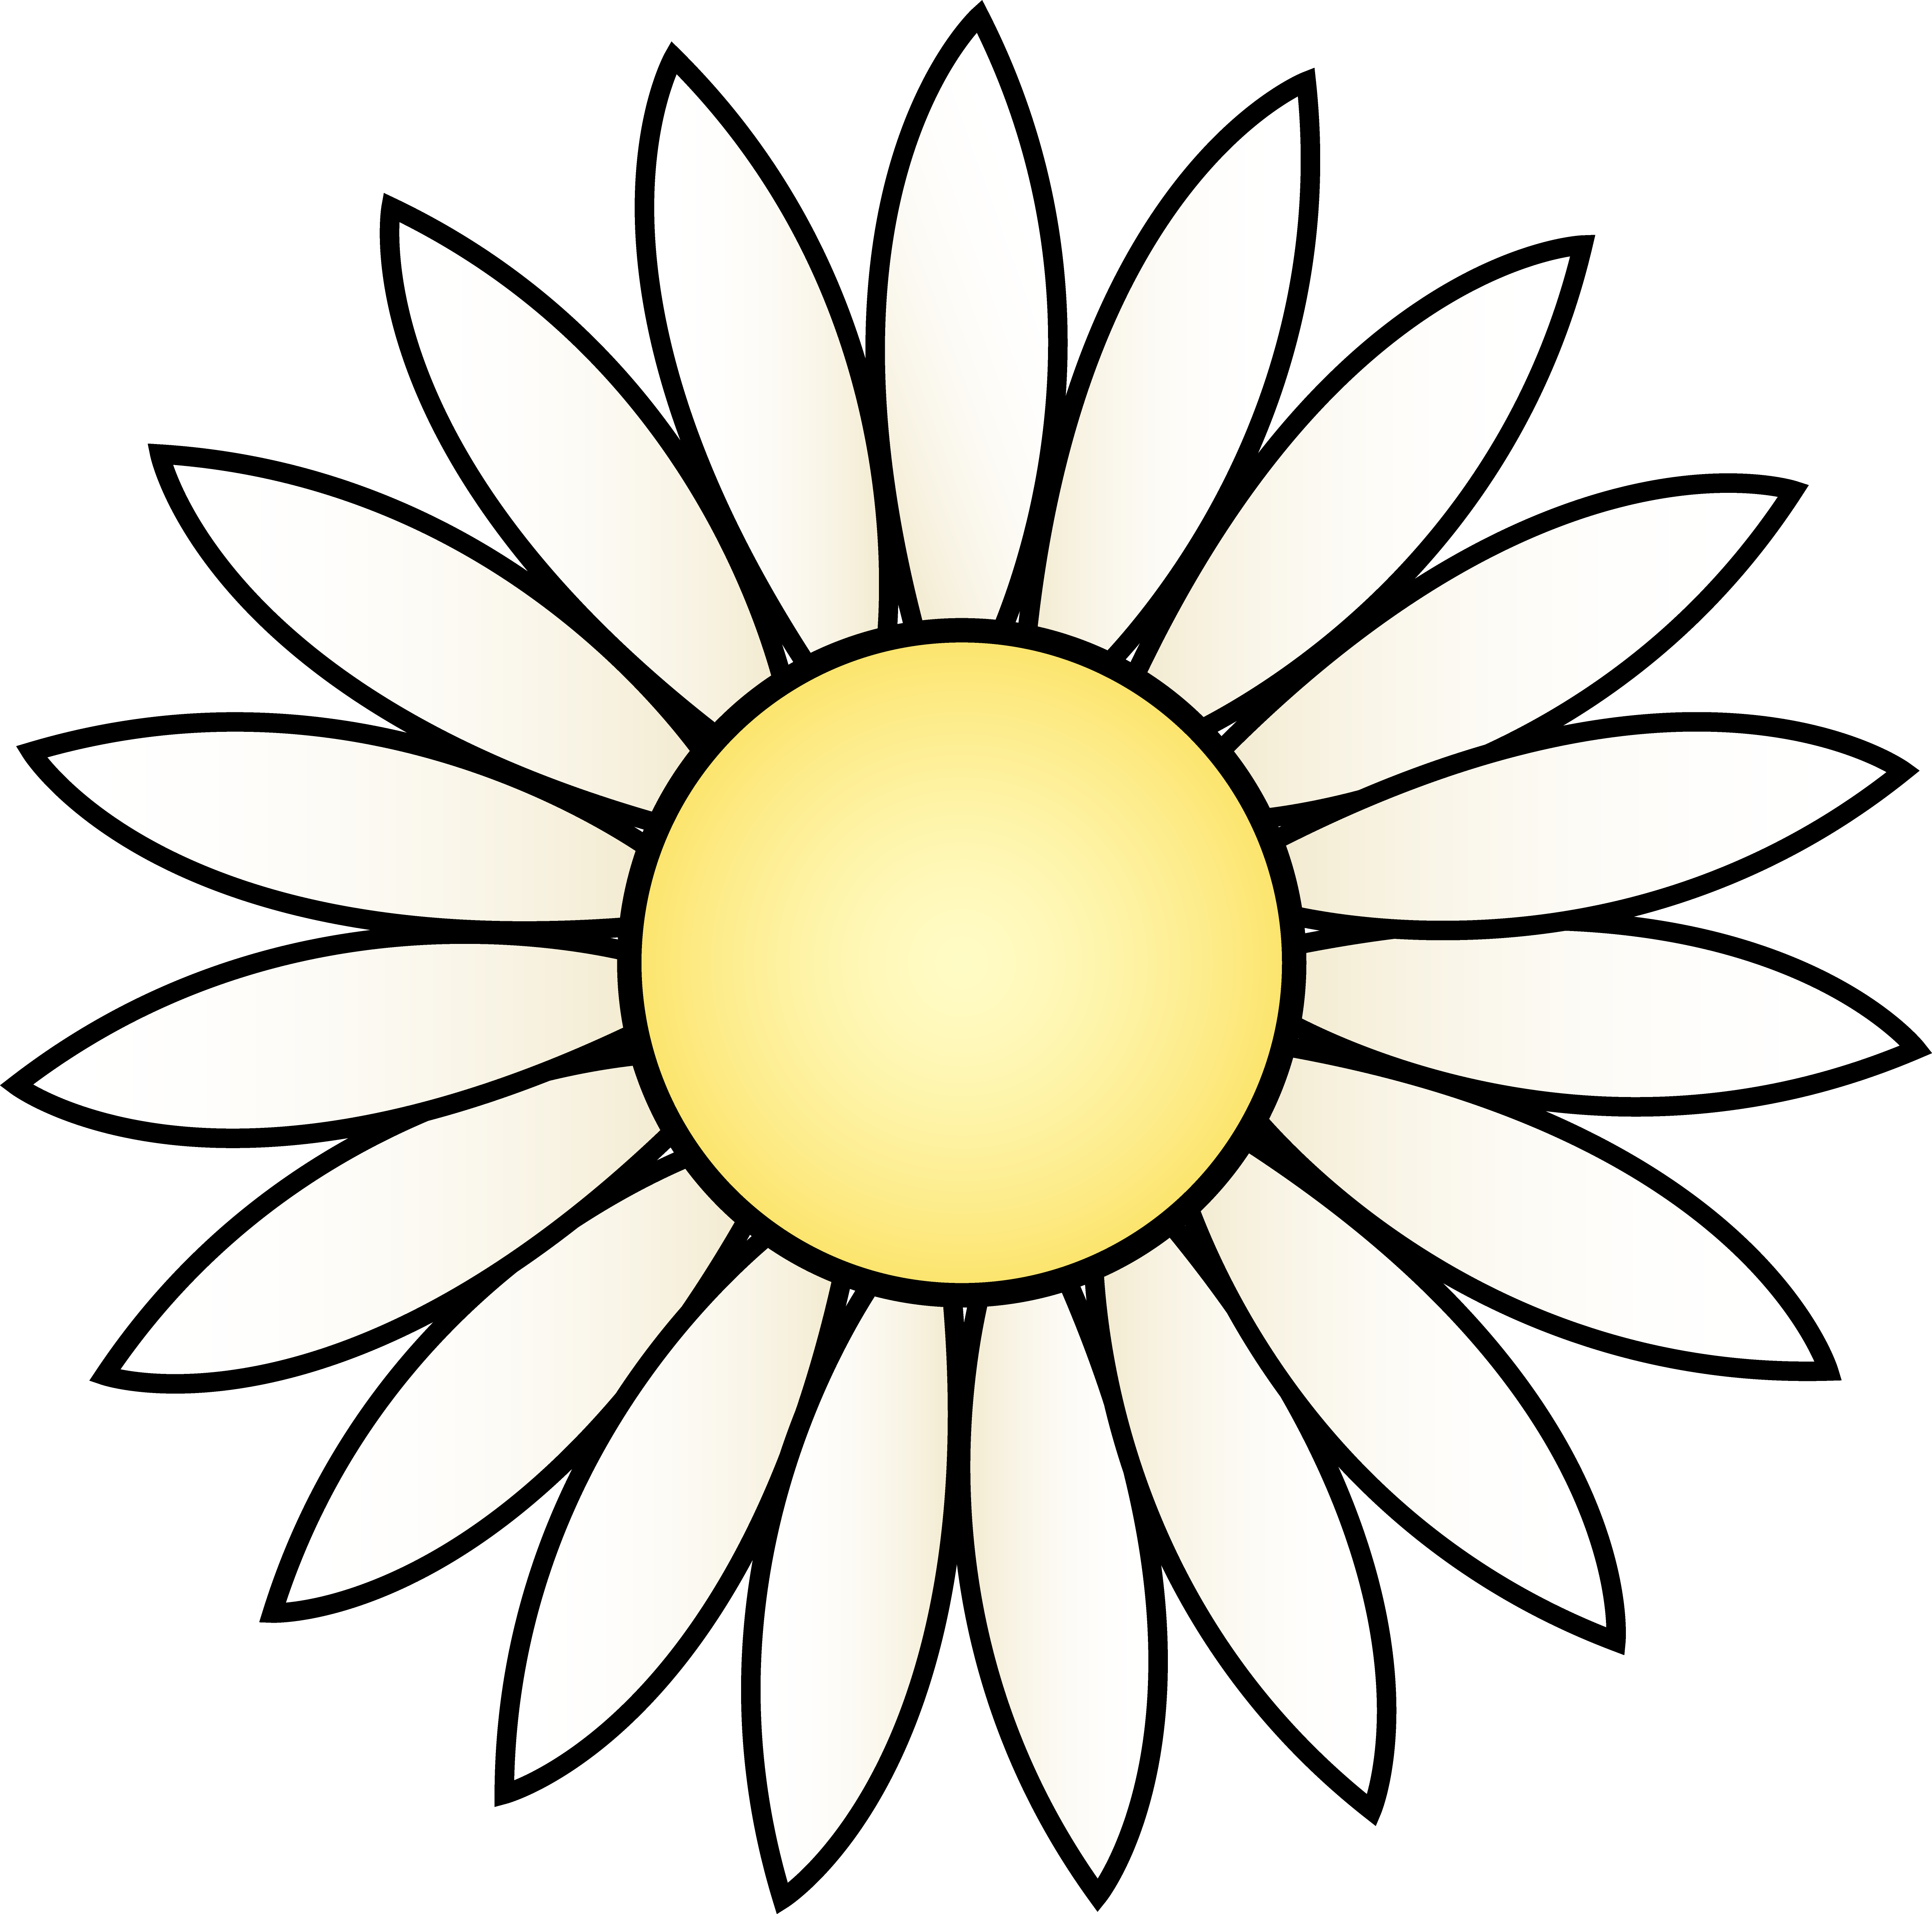 Daisy Images Hd Photo Clipart